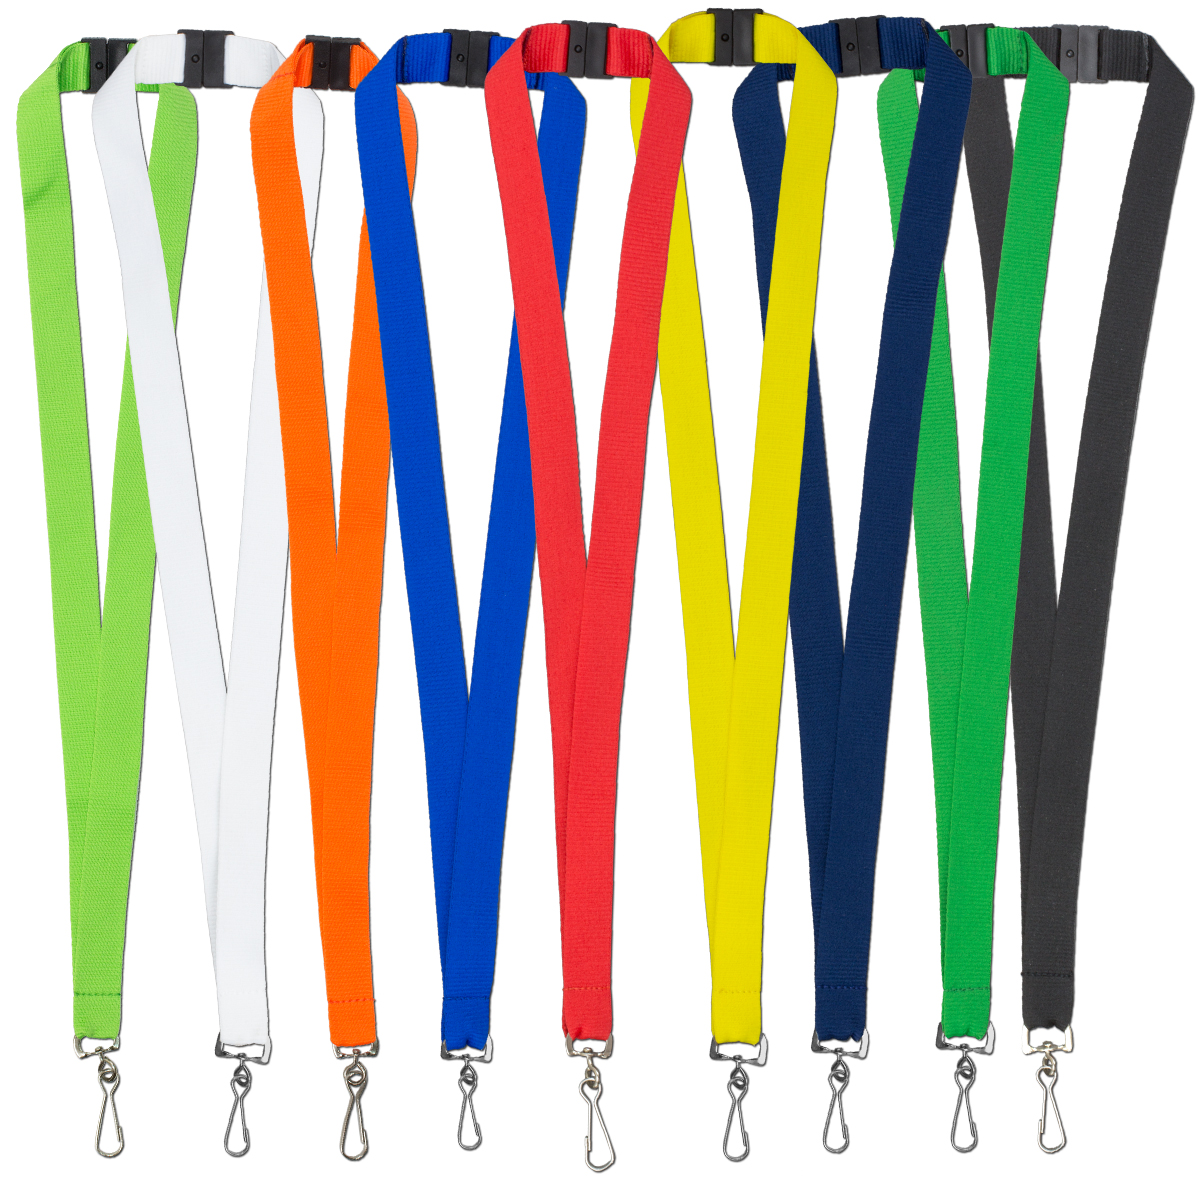 3/4” Blank Lanyard with Breakaway Safety Release Attachment - Swivel Clip